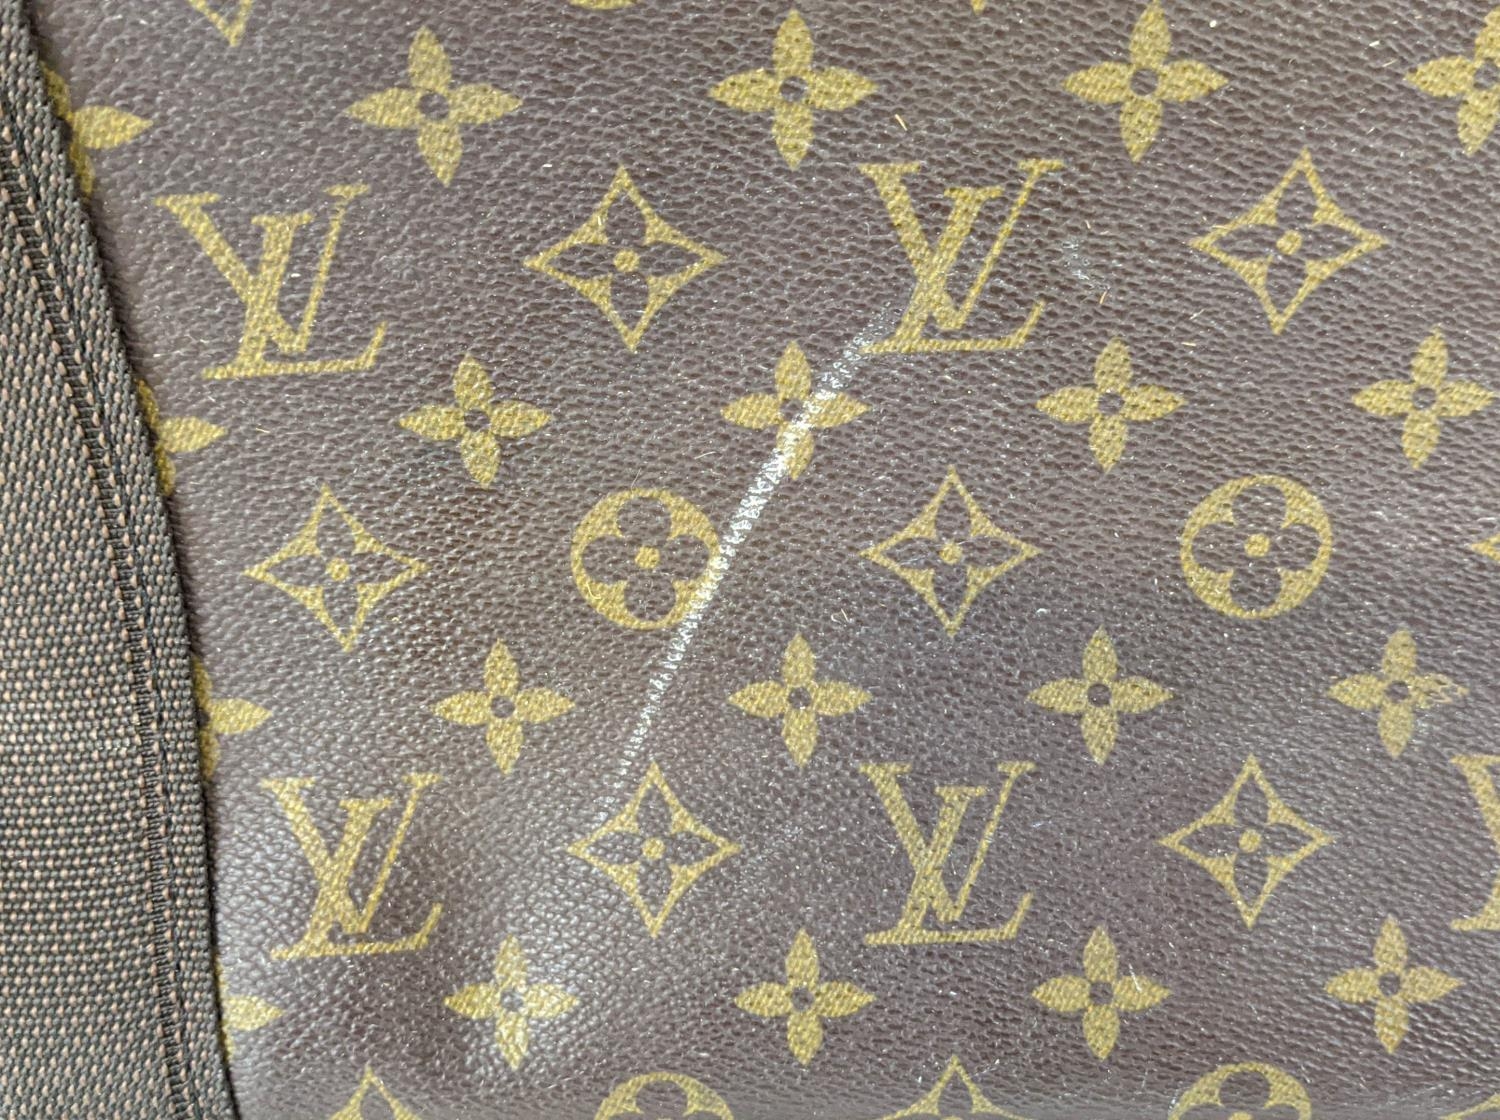 LOUIS VUITTON SATELLITE 70 SUITCASE, monogram canvas and leather, brass hardware, double buckle - Image 5 of 8